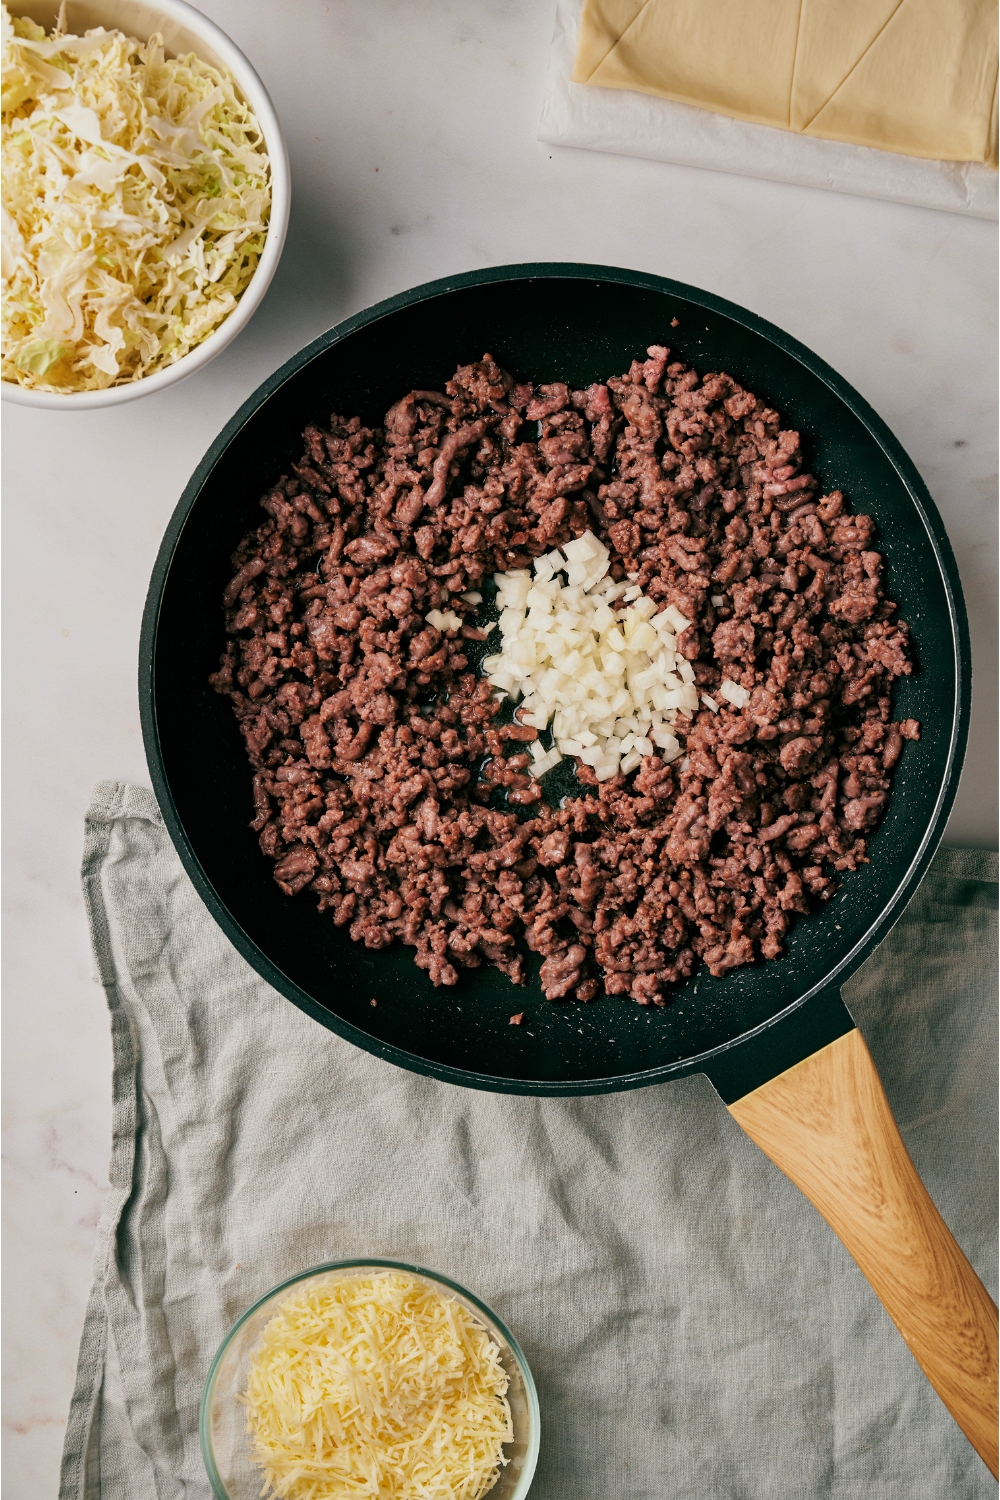 A skillet filled with ground beef and a pile of diced onions in the center.